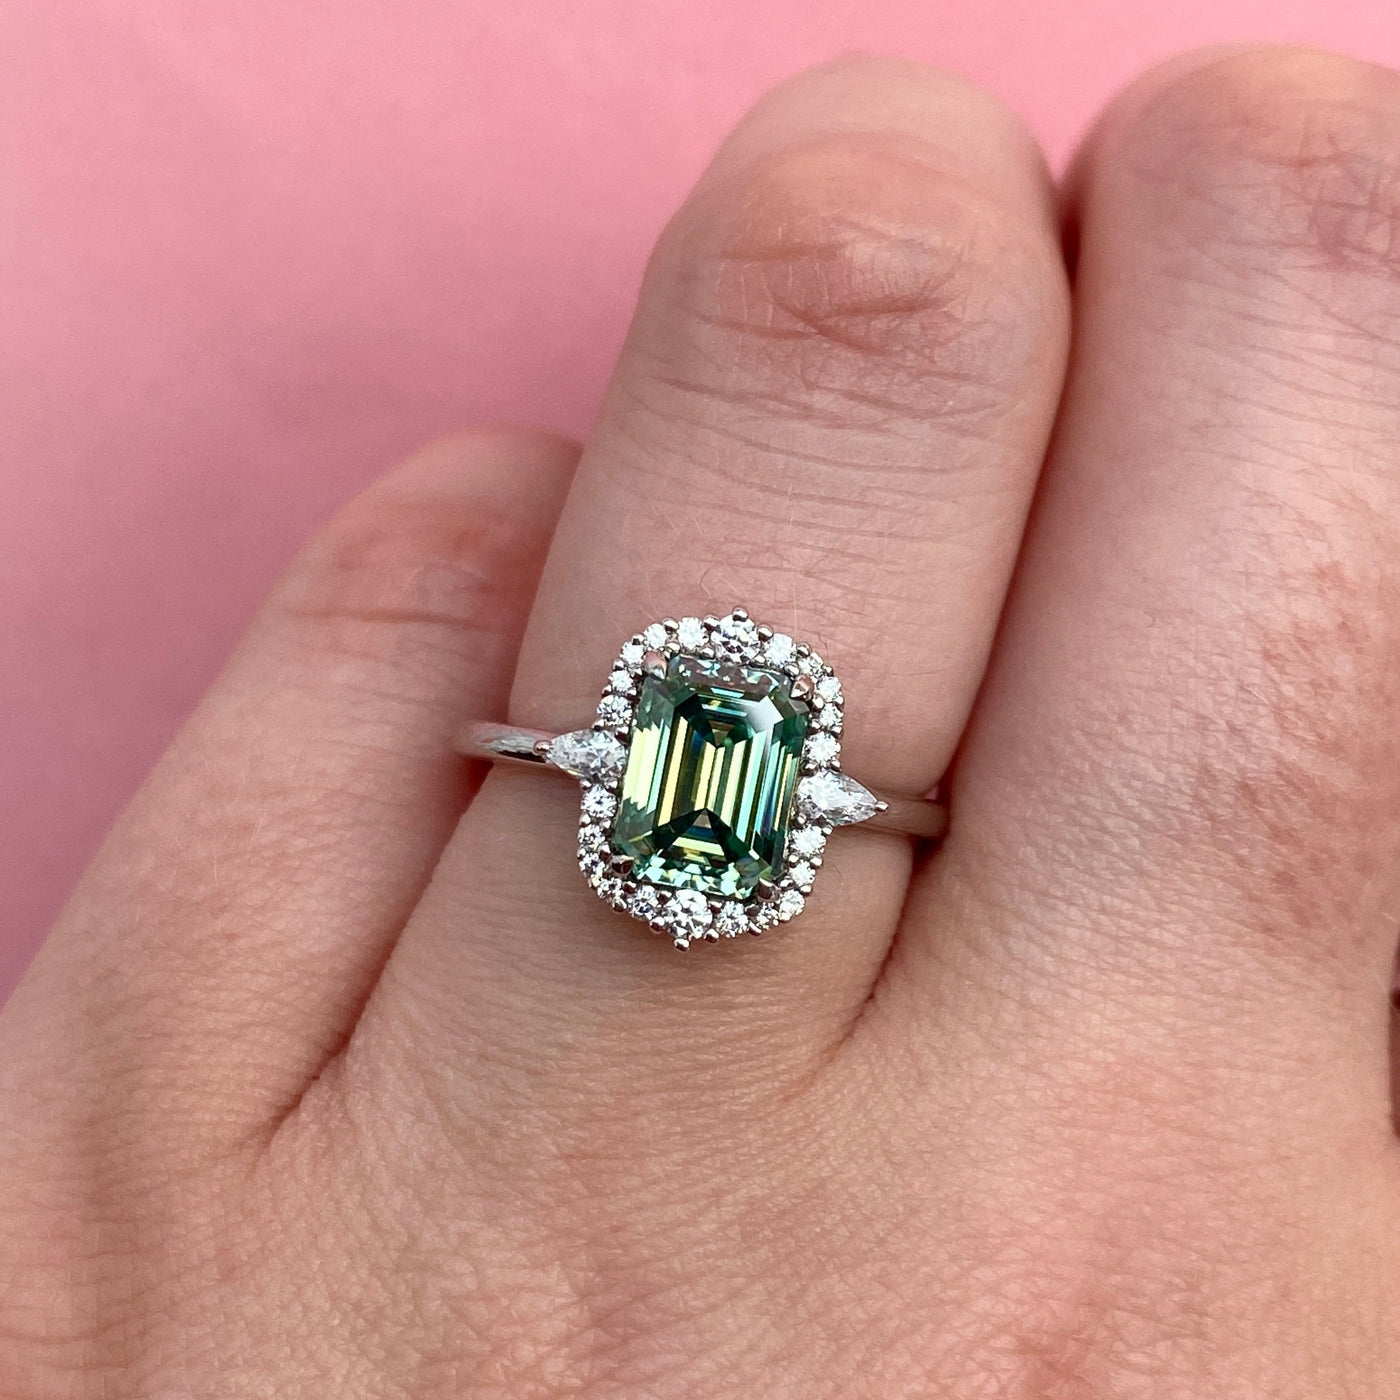 Cordelia - Emerald Cut Teal Moissanite Ring with Graduated Halo - Custom Made-to-Order Design